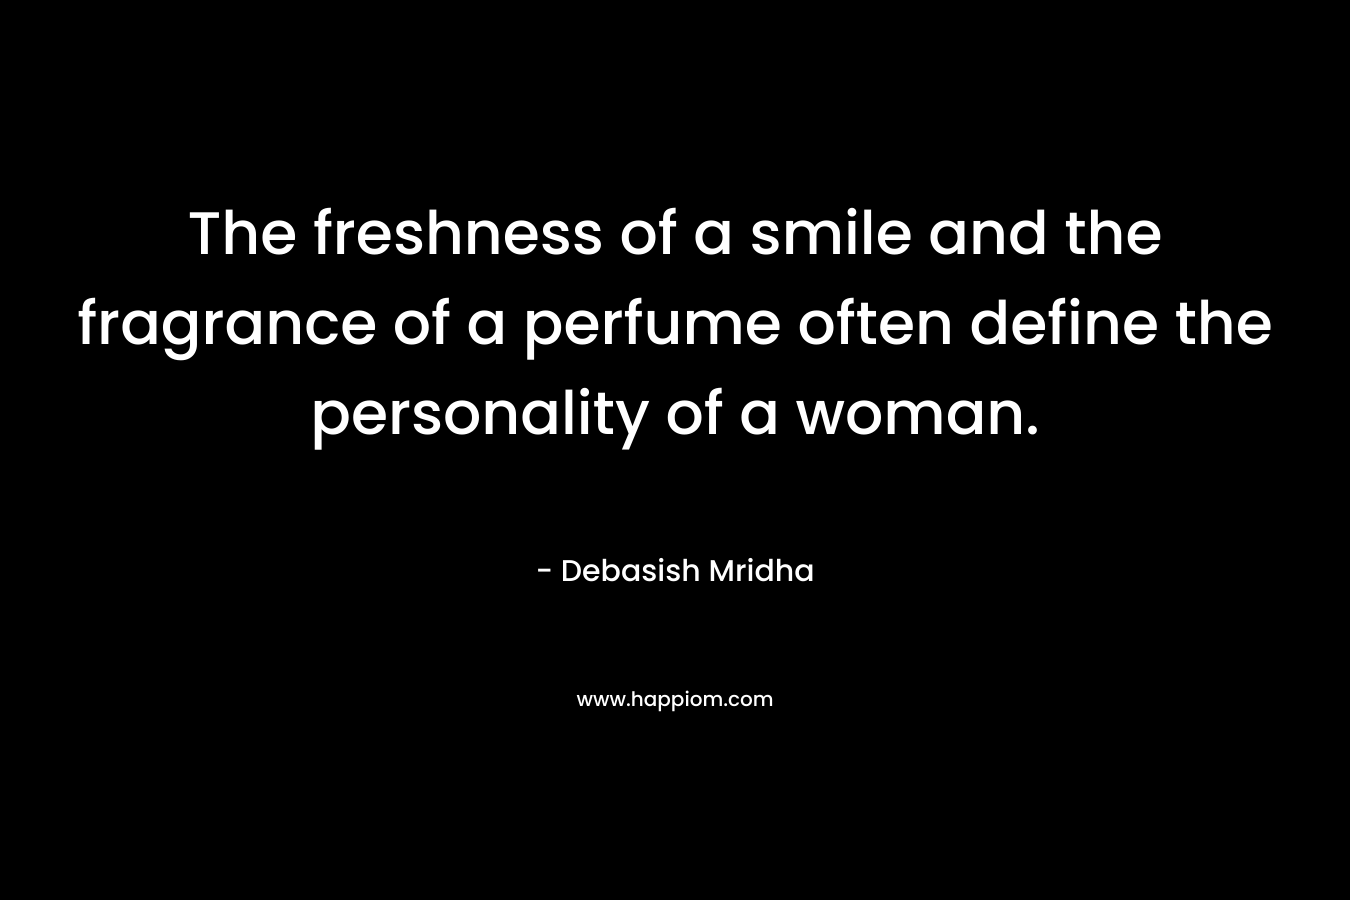 The freshness of a smile and the fragrance of a perfume often define the personality of a woman.